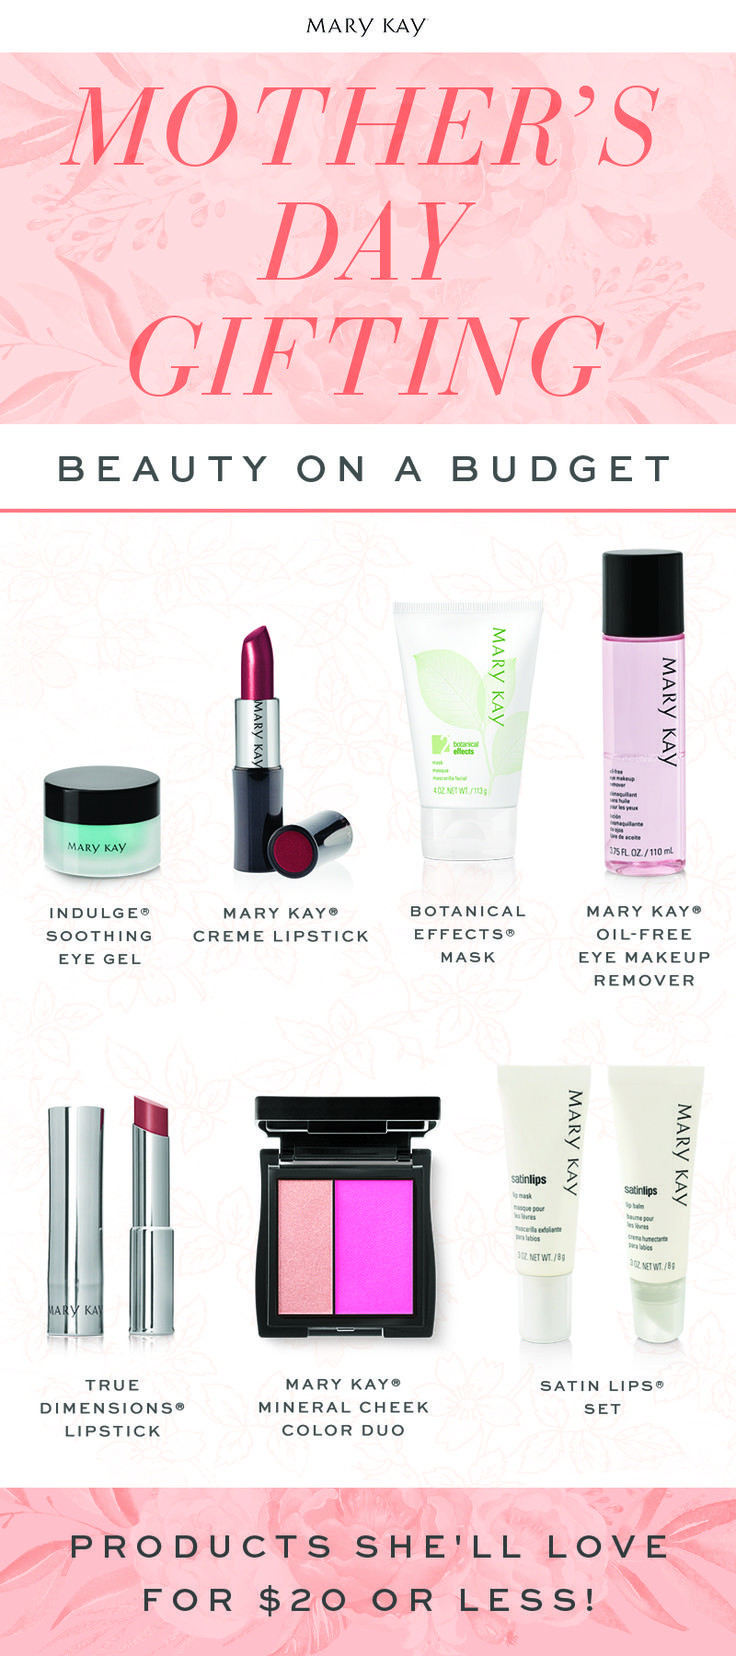 Mary Kay Mothers Day Ideas
 18 best images about Mary Kay Mother s Day Promotion